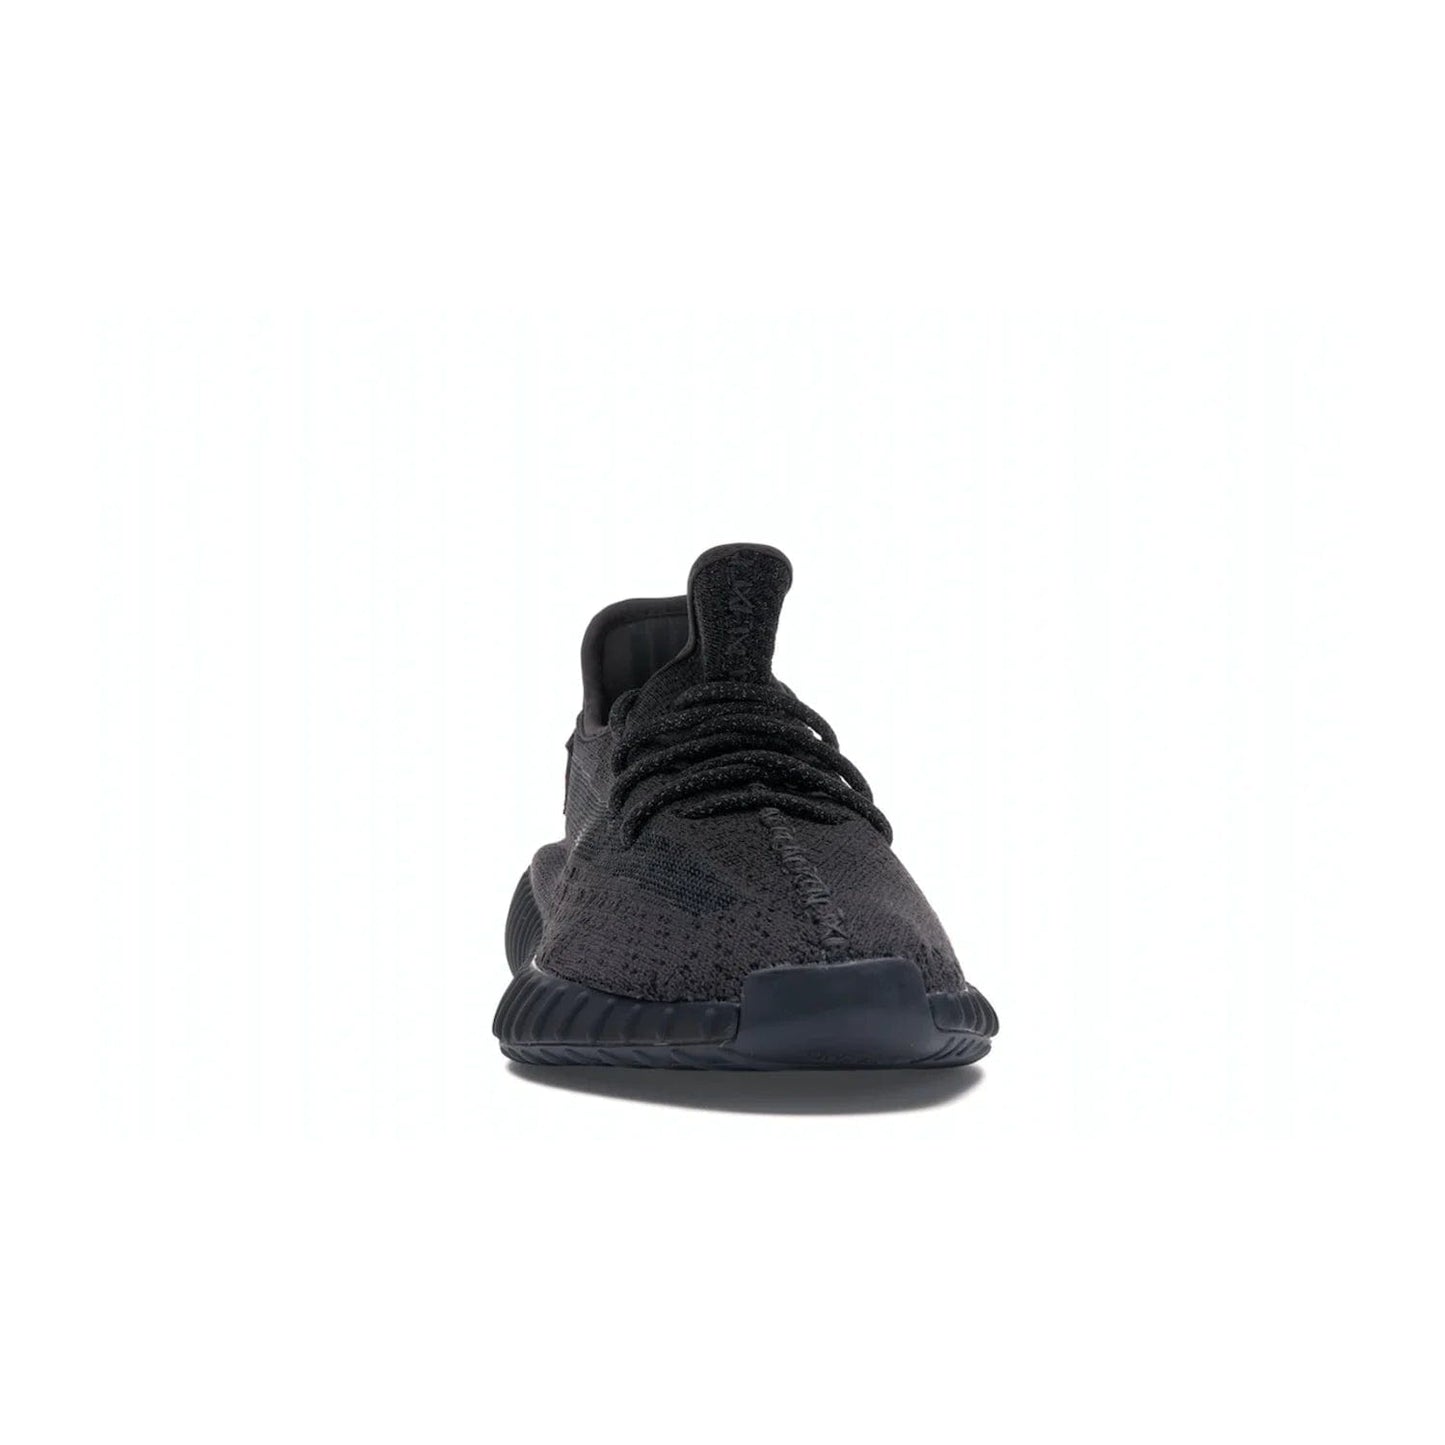 adidas Yeezy Boost 350 V2 Static Black (Reflective) - Image 9 - Only at www.BallersClubKickz.com - Make a statement with the adidas Yeezy Boost 350 V2 Static Black Reflective. All-black upper, reflective accents, midsole, and sole combine for a stylish look. High quality materials. June 2019 release. Add to your collection today.